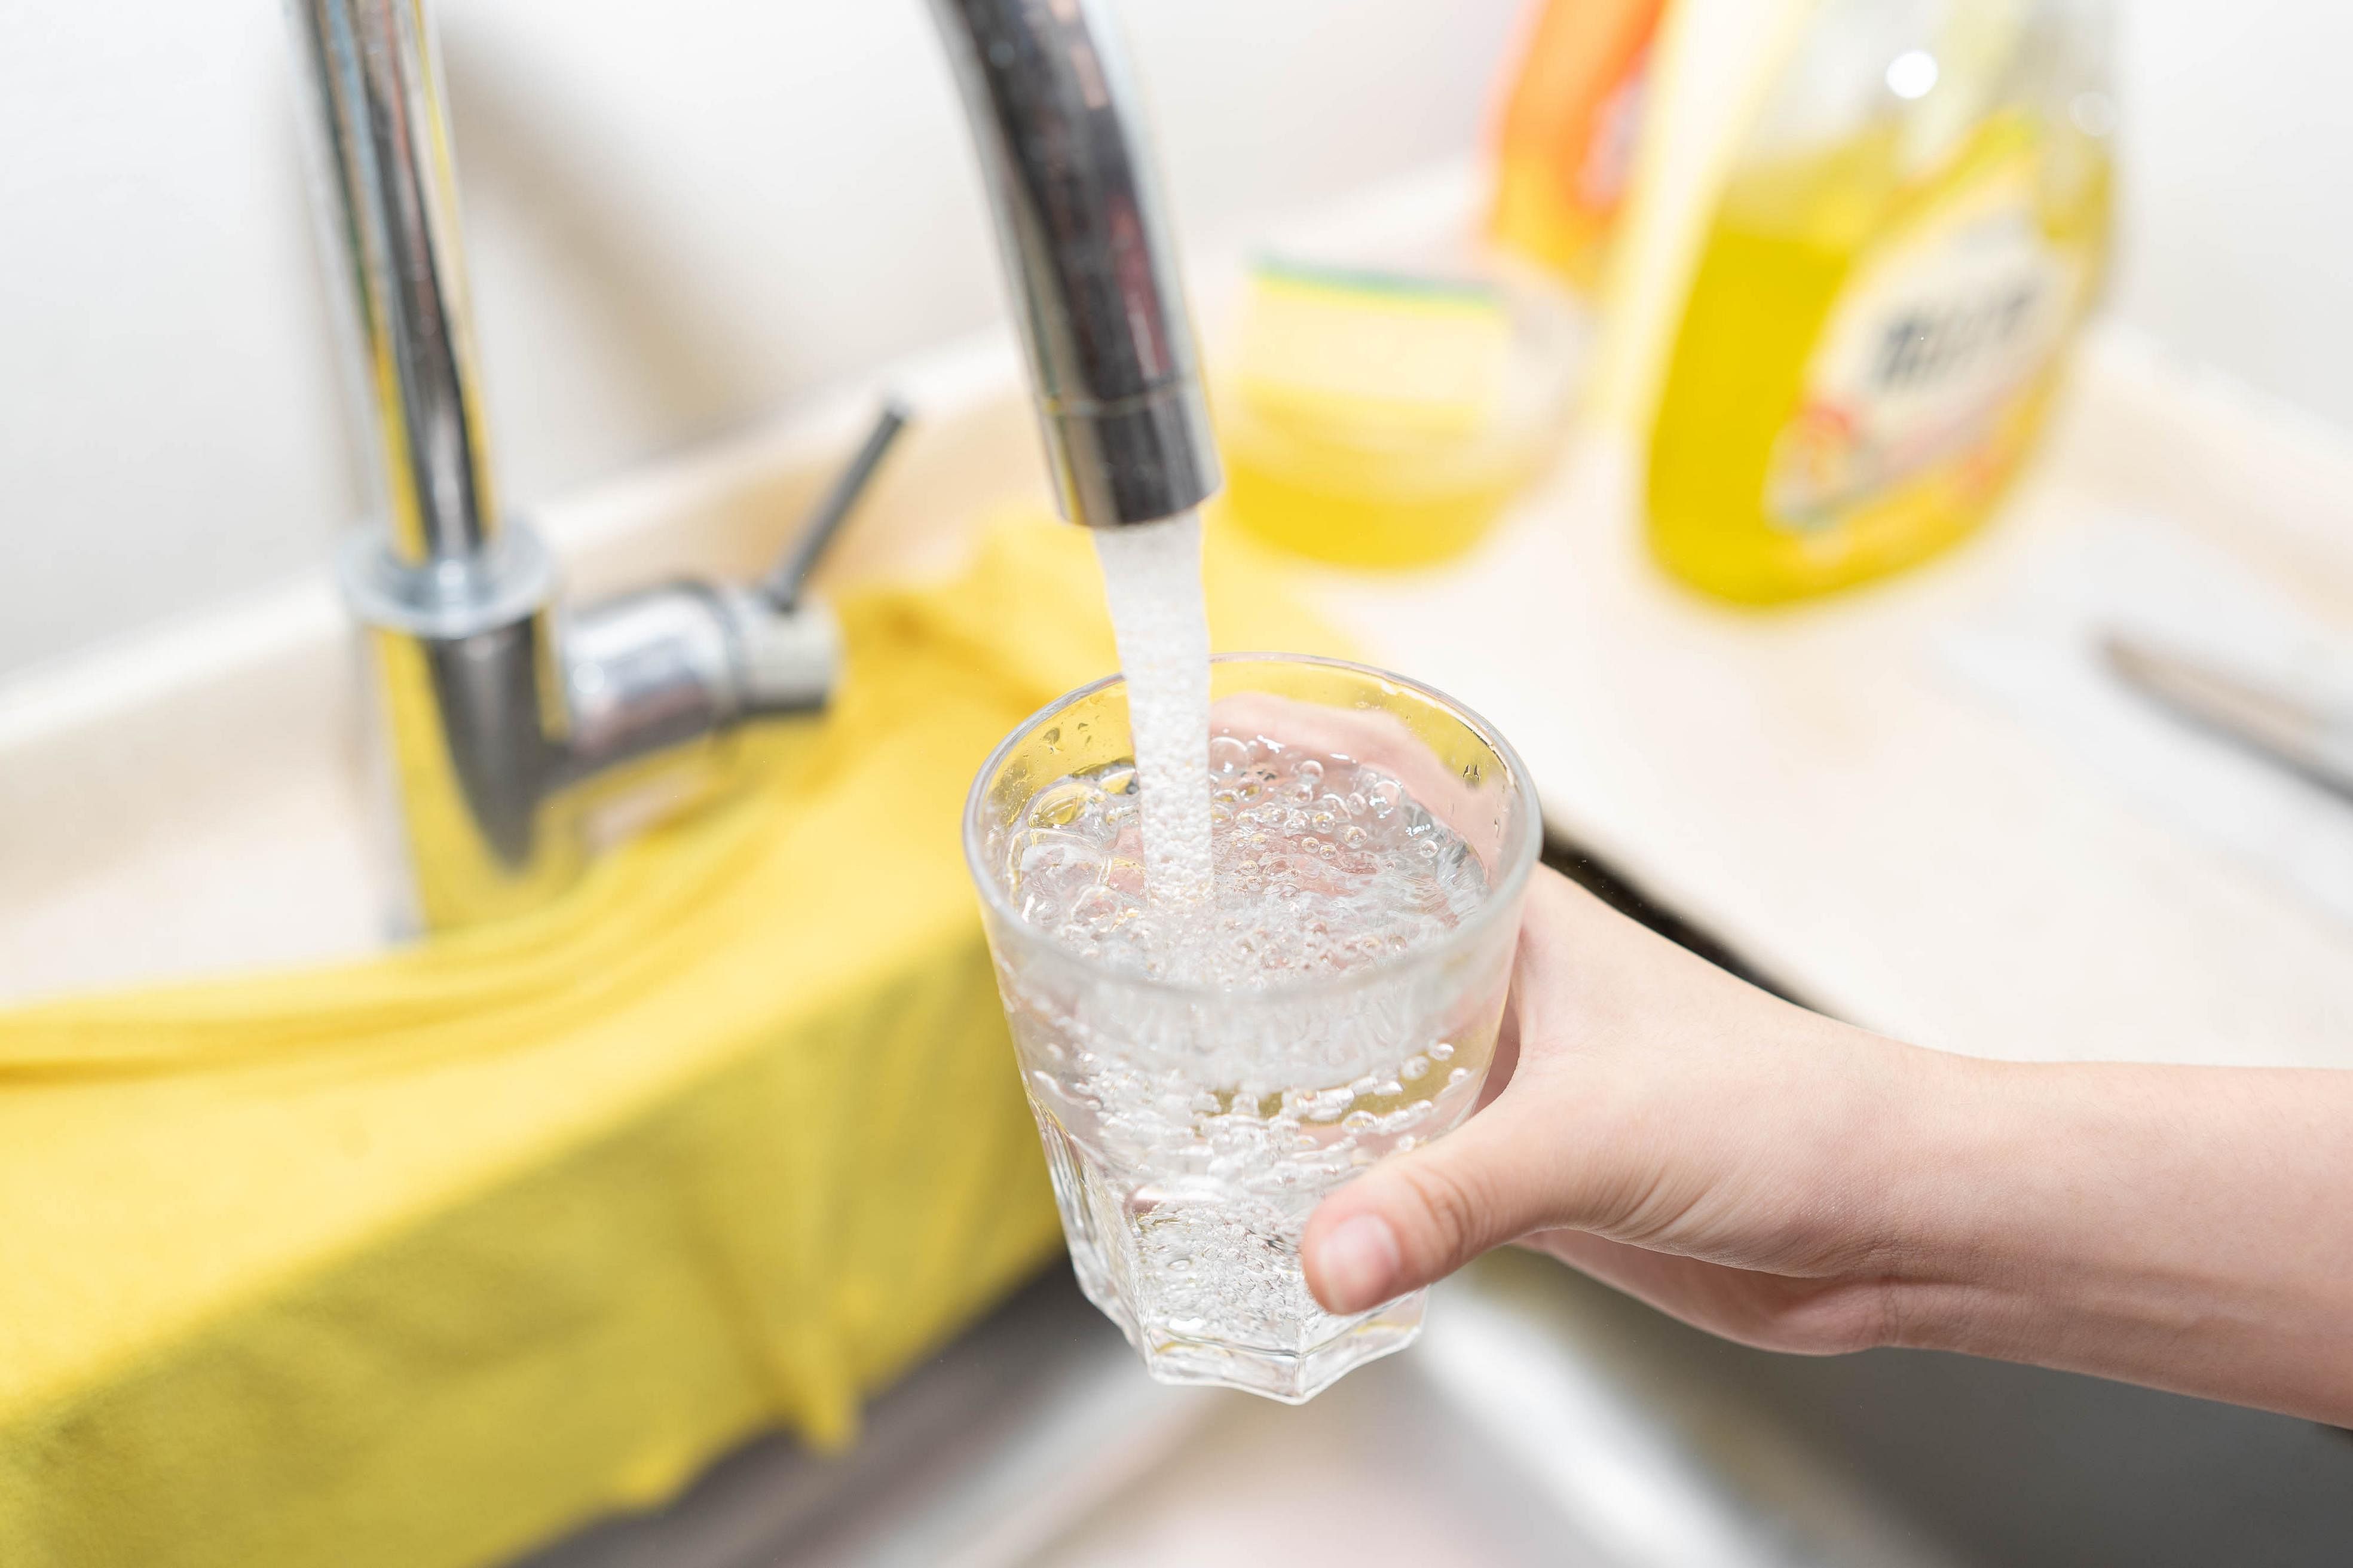 askST: When should I worry about the water I drink and do I need a filter system?